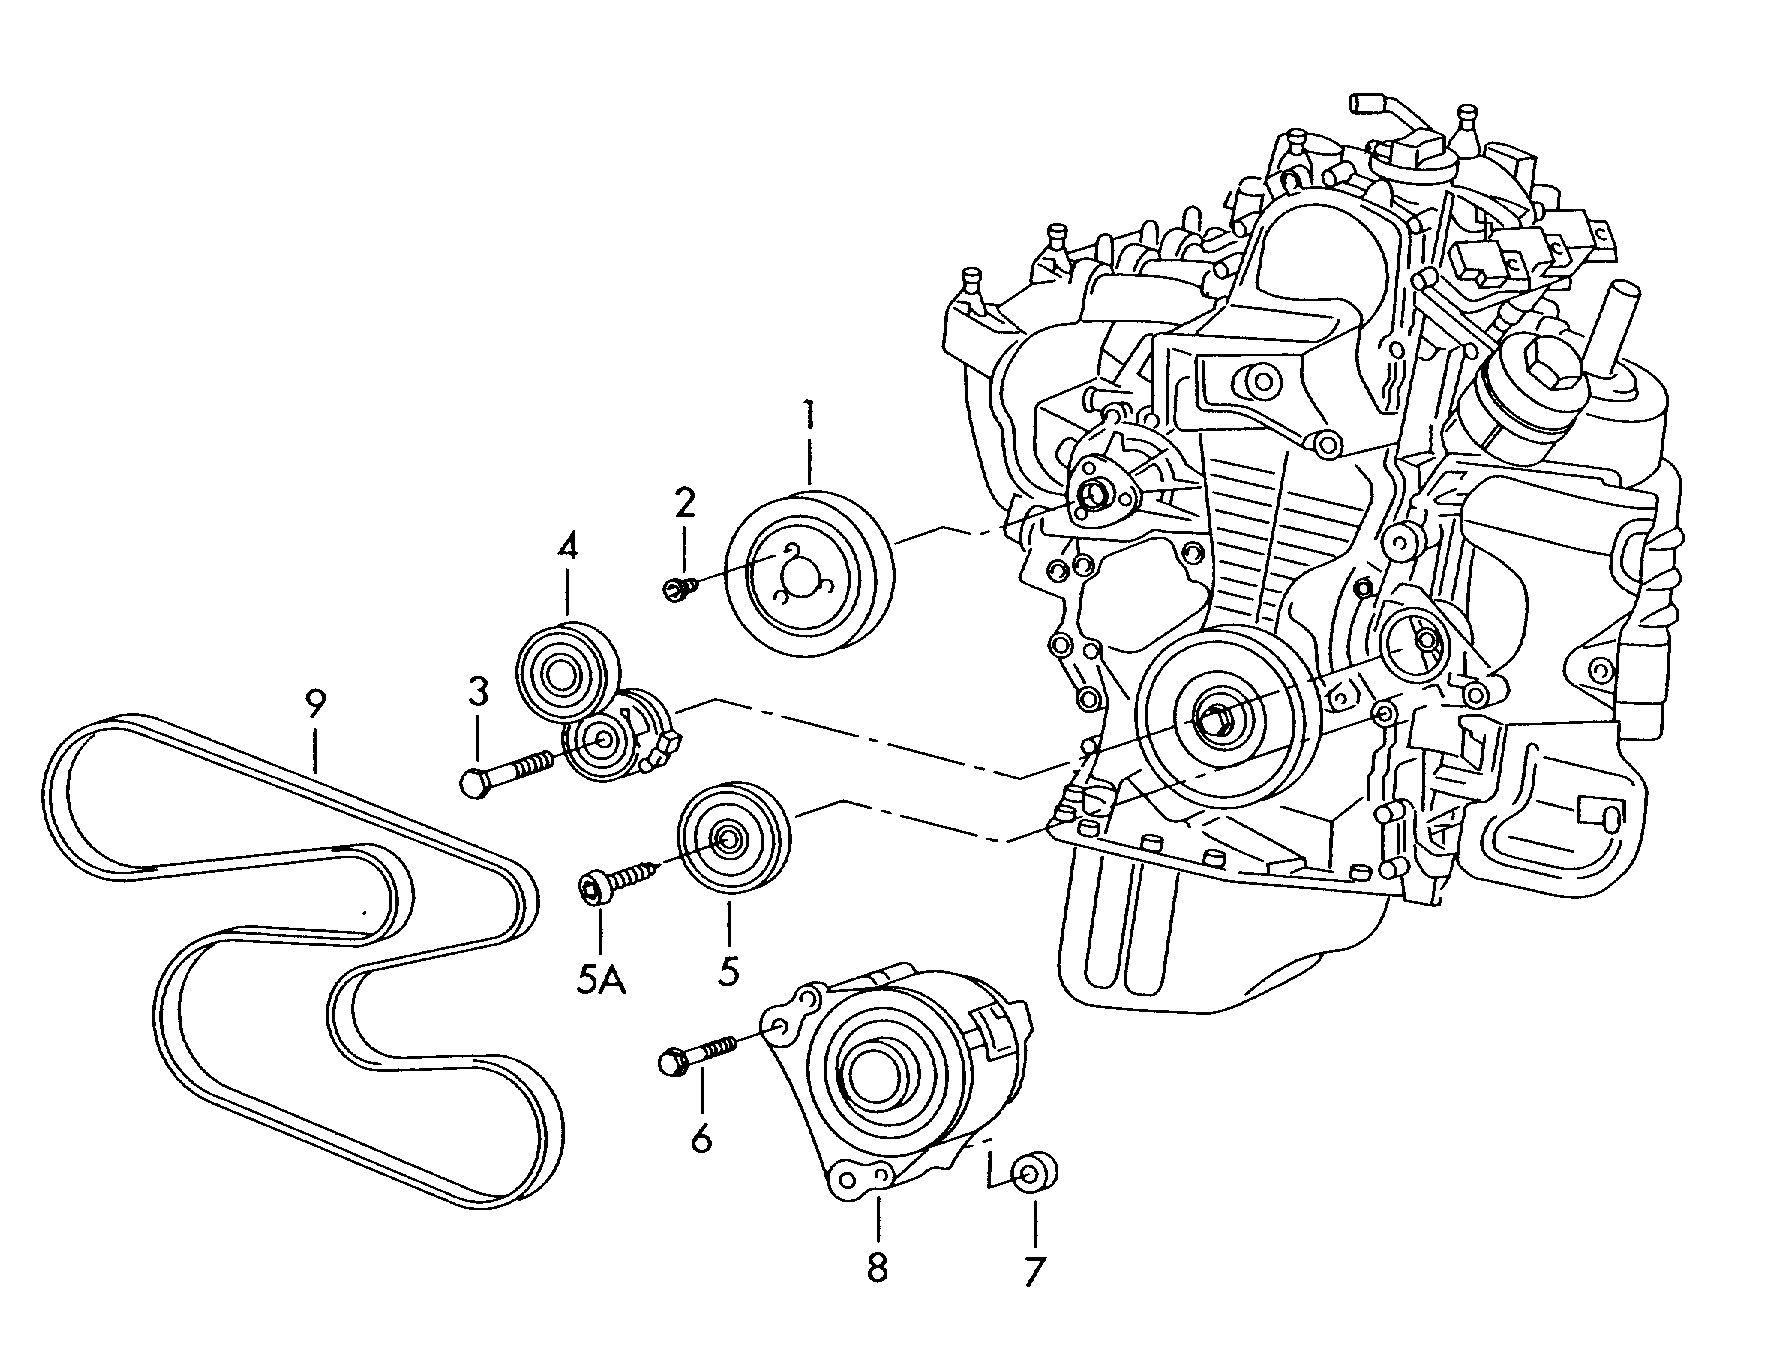 connecting and mounting parts<br>for alternatorPoly-V-belt 1.2 Ltr. - Roomster - ro